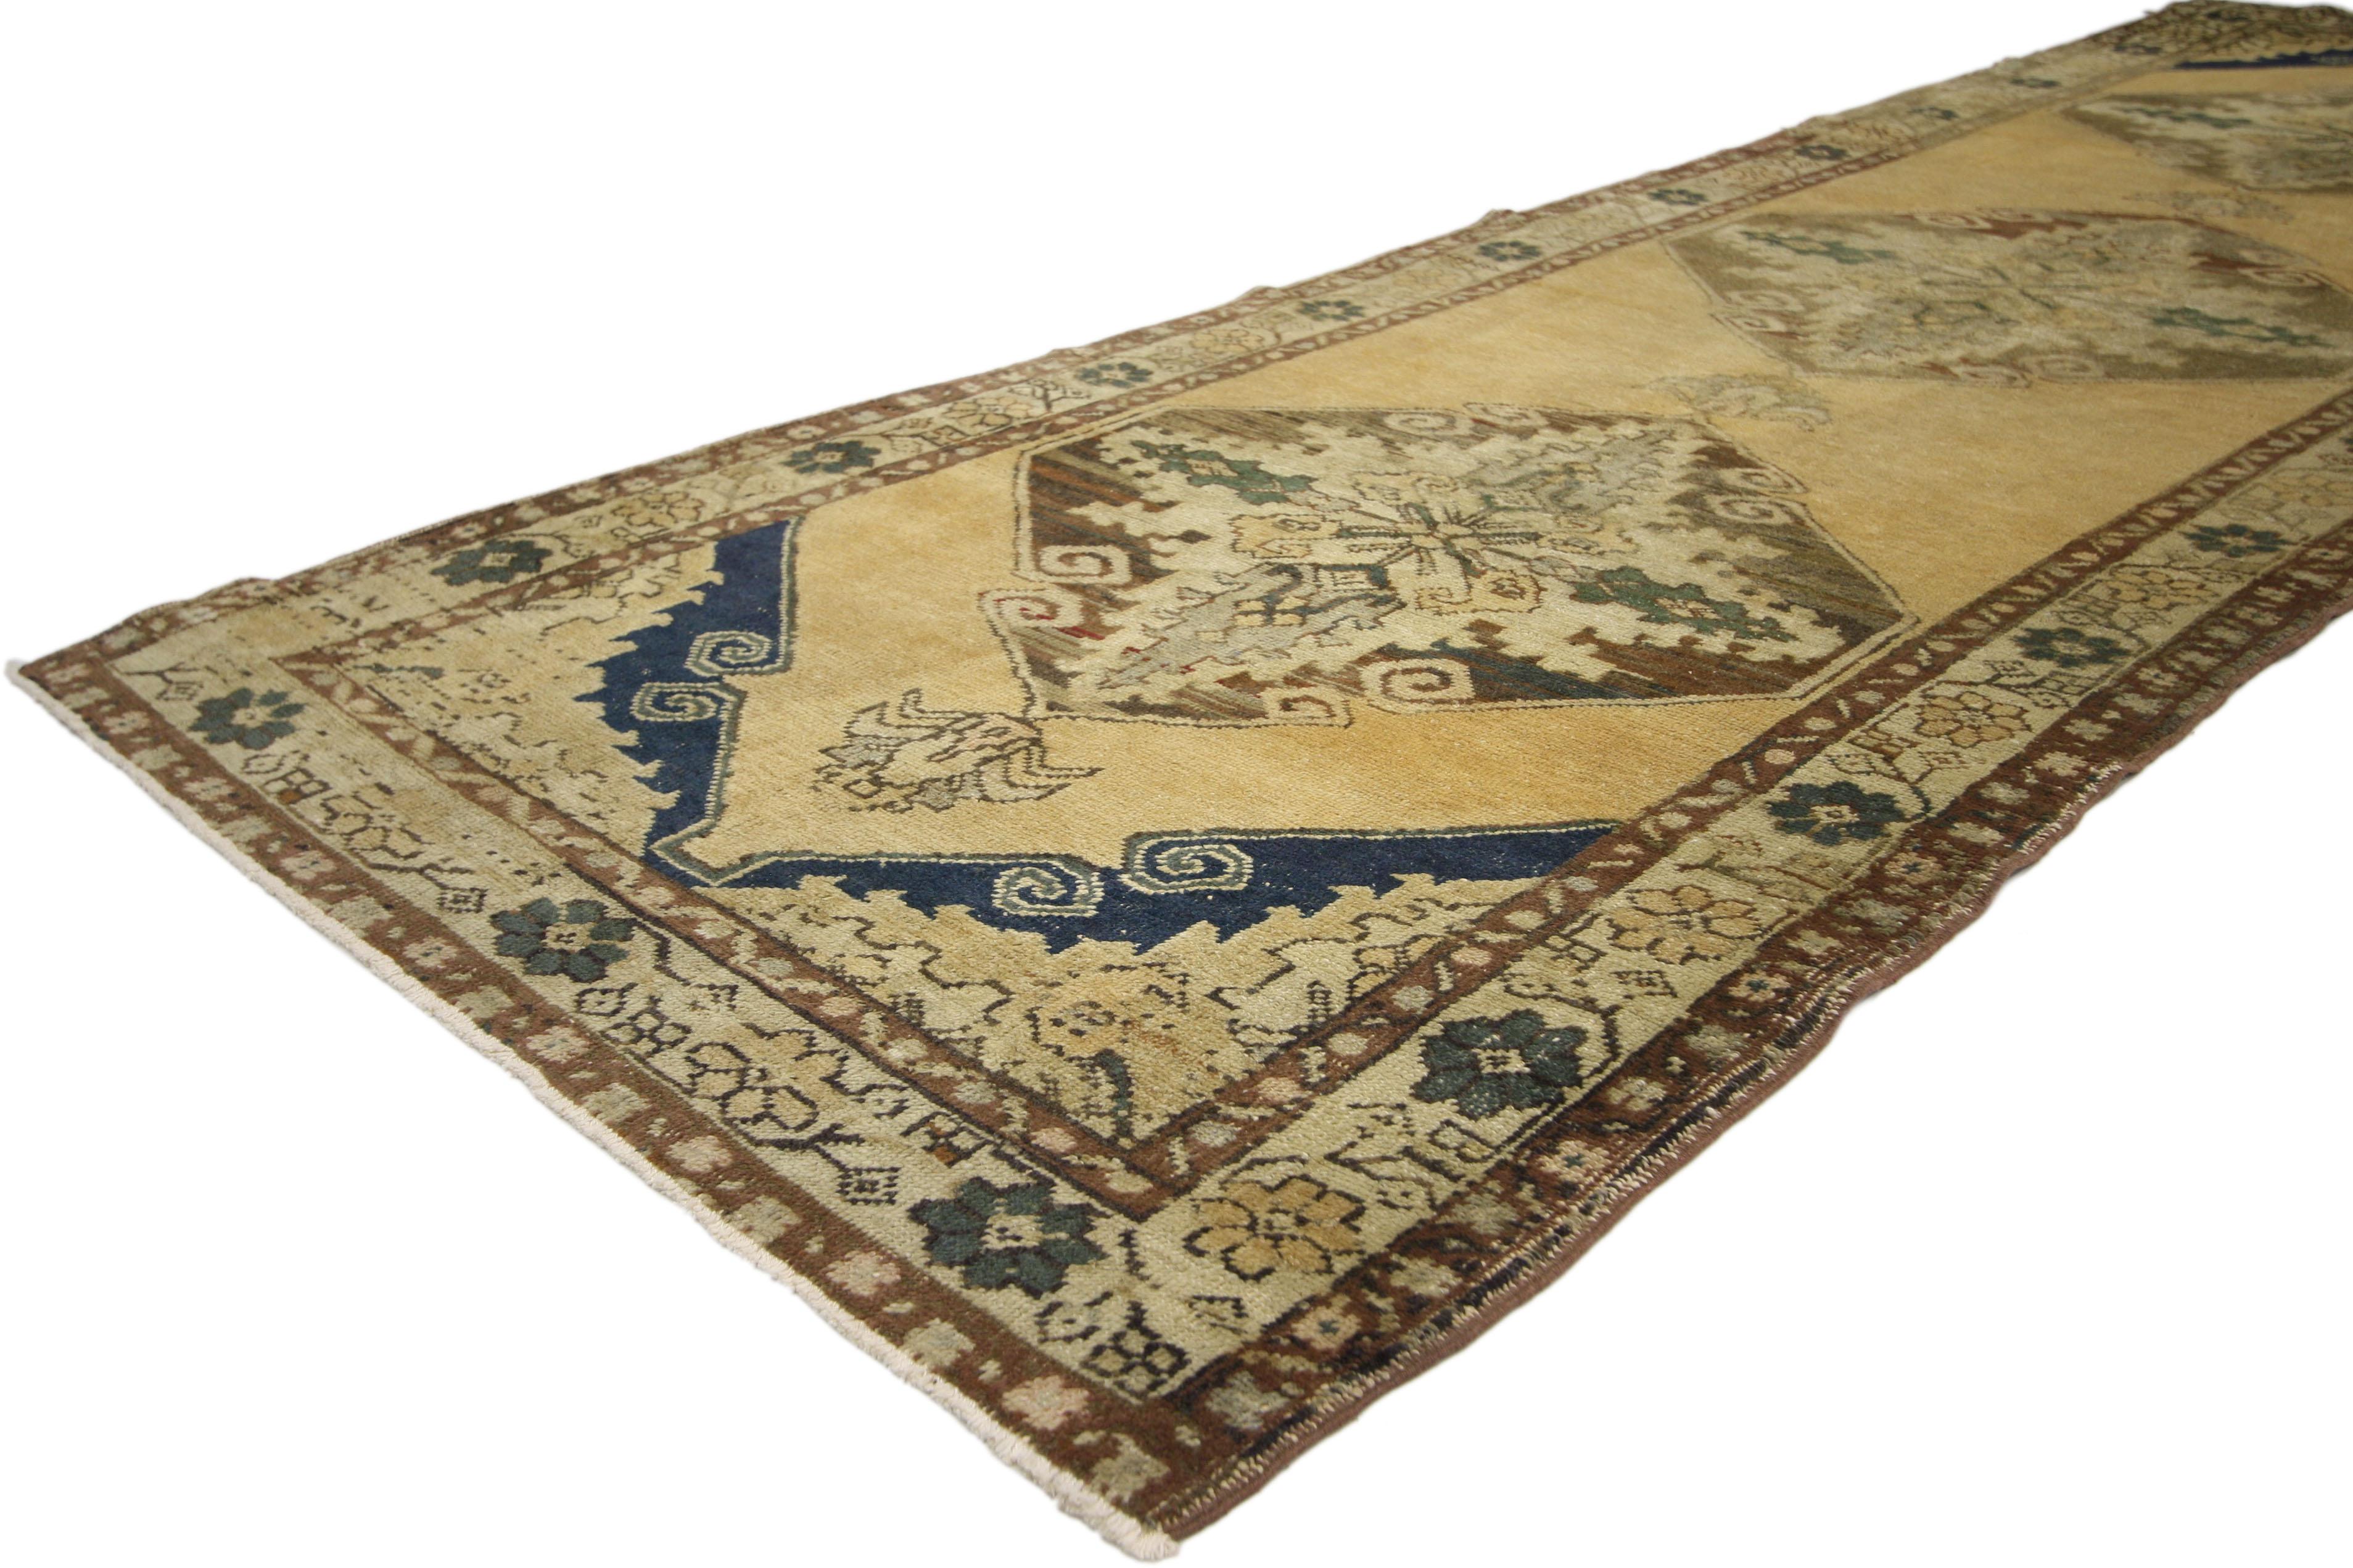 This vintage Turkish Oushak carpet runner with Modern style features three geometric medallions with cartouche finials in an open, abrashed golden-beige field. Resplendent with elements of modern design, this vintage Oushak runner handsomely